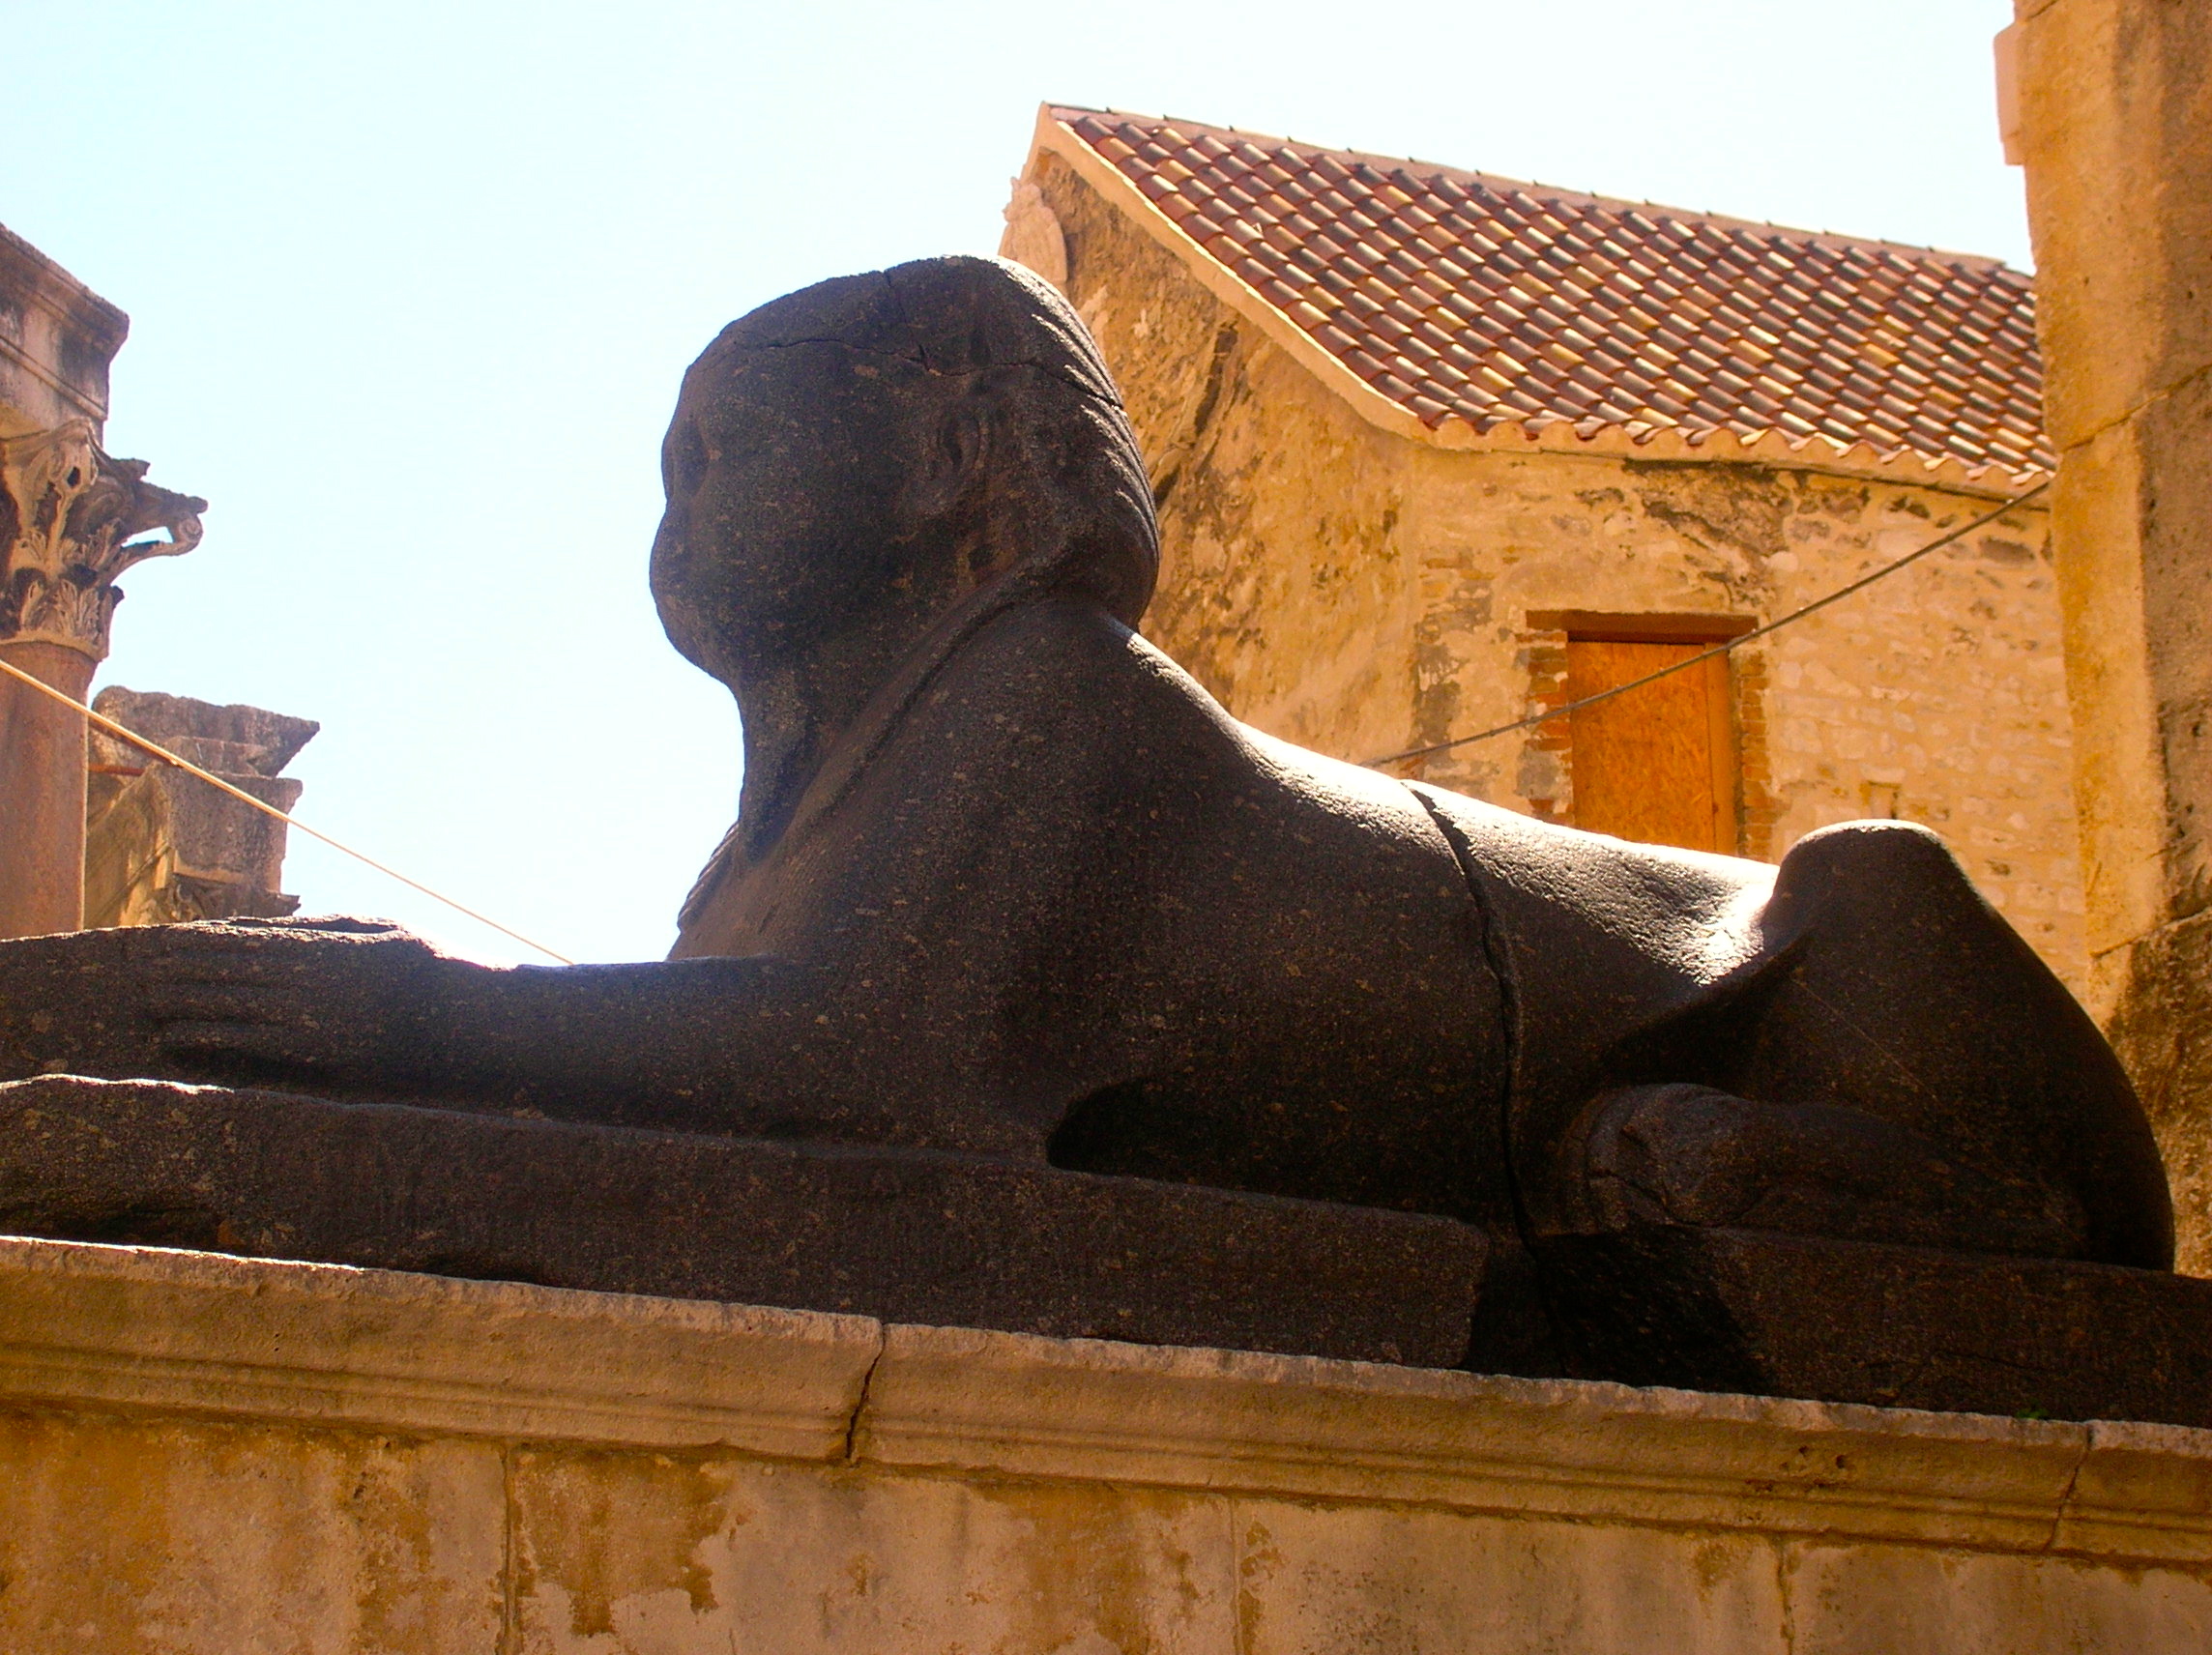 An Egyptian sphinx still guards the entrance to what was once Jupiter's Temple. Photo by Marla Norman.